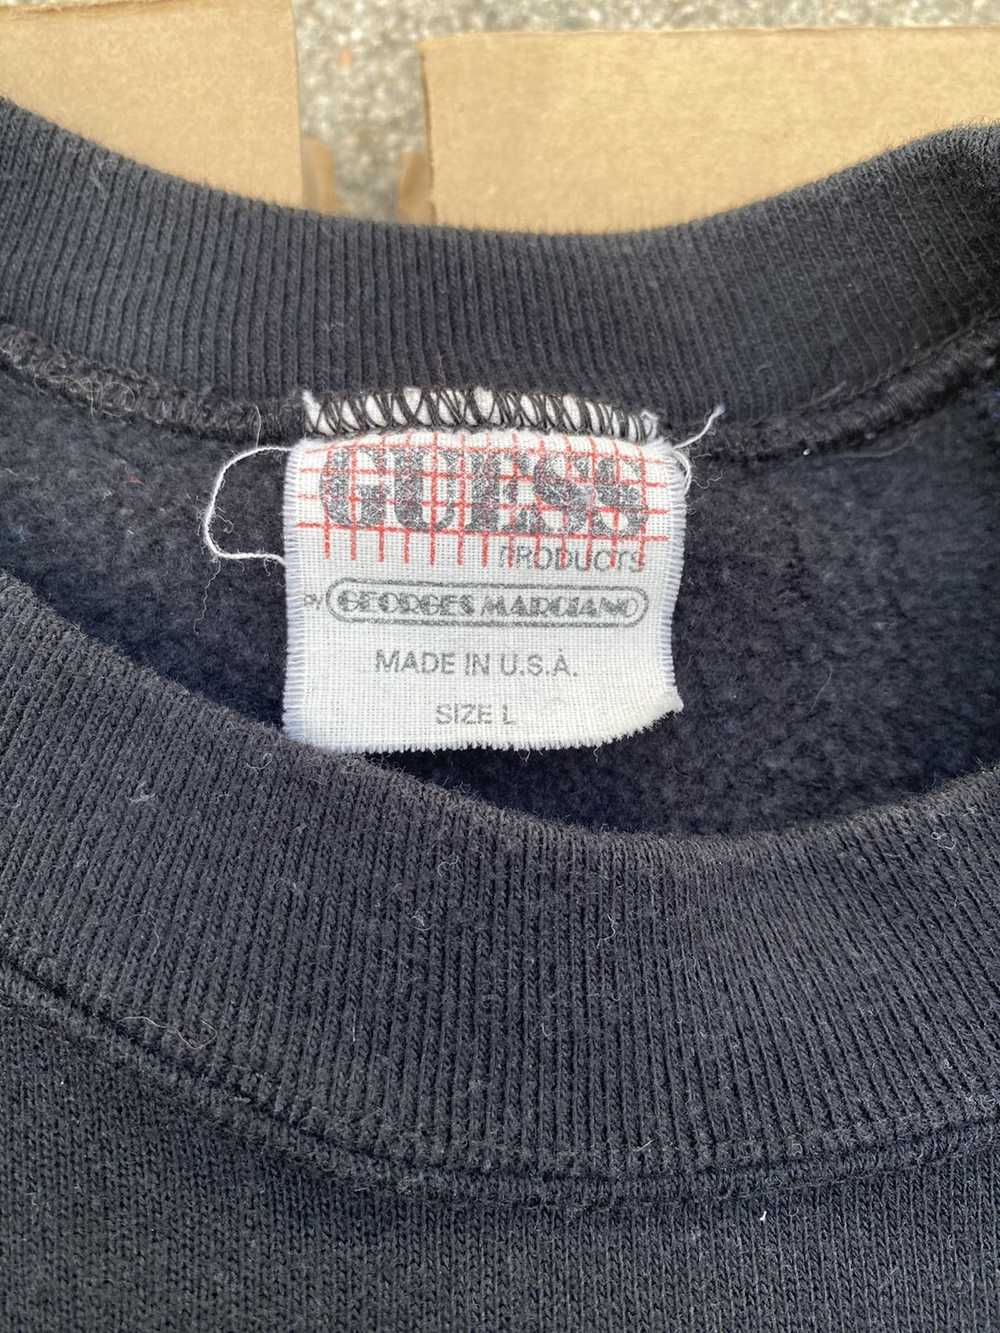 Guess Rare Vintage Guess Teddy Sweater - image 4